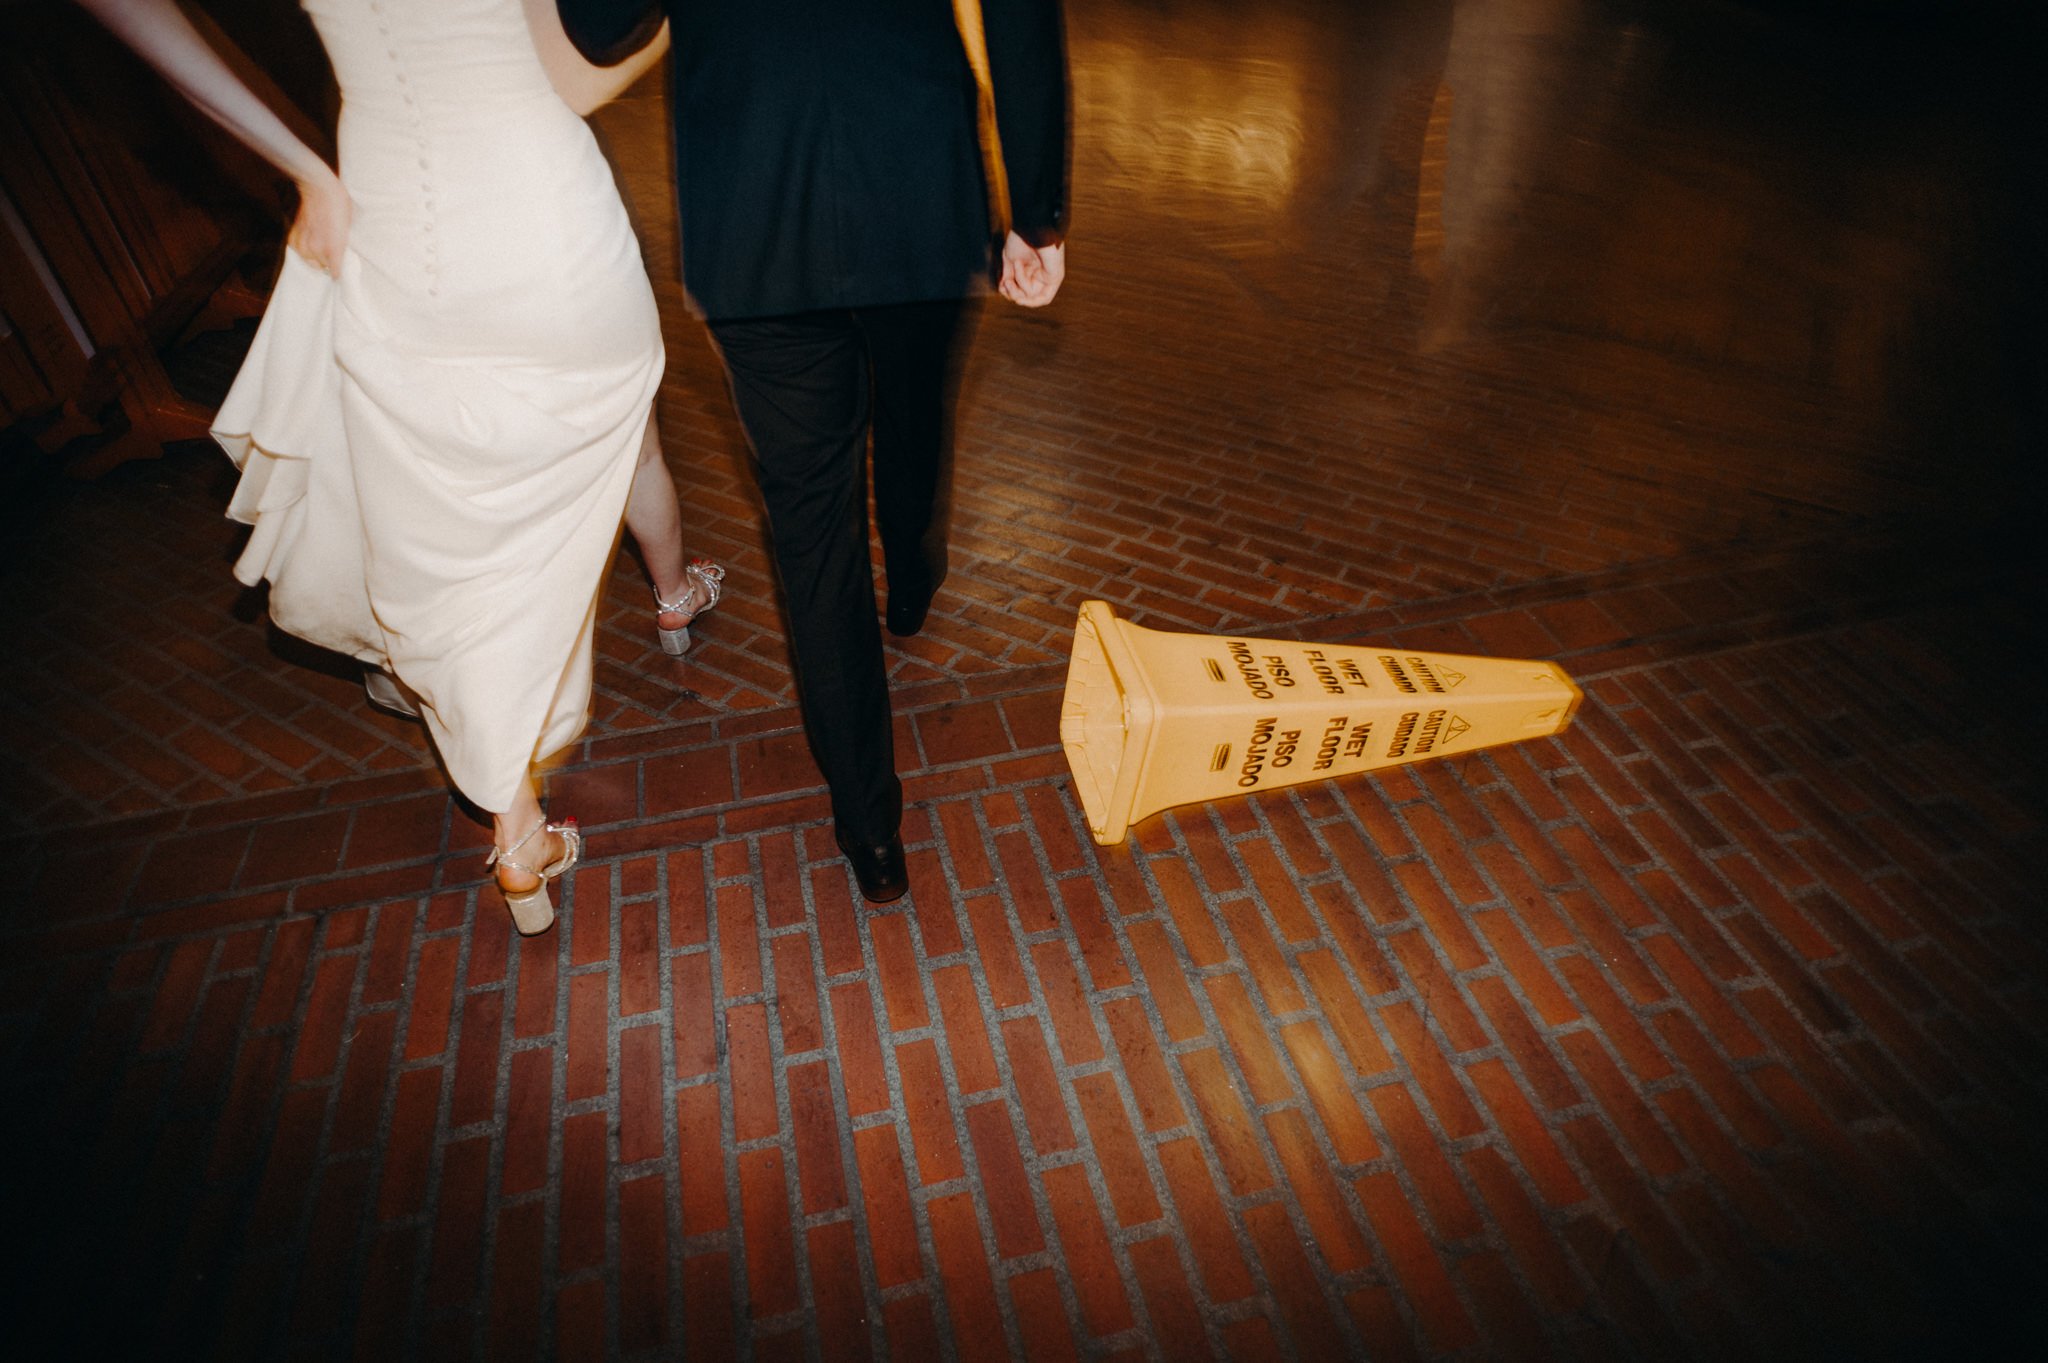 union station home bound brewery wedding - wedding photographers in los angeles - itlaphoto.com-112.jpg